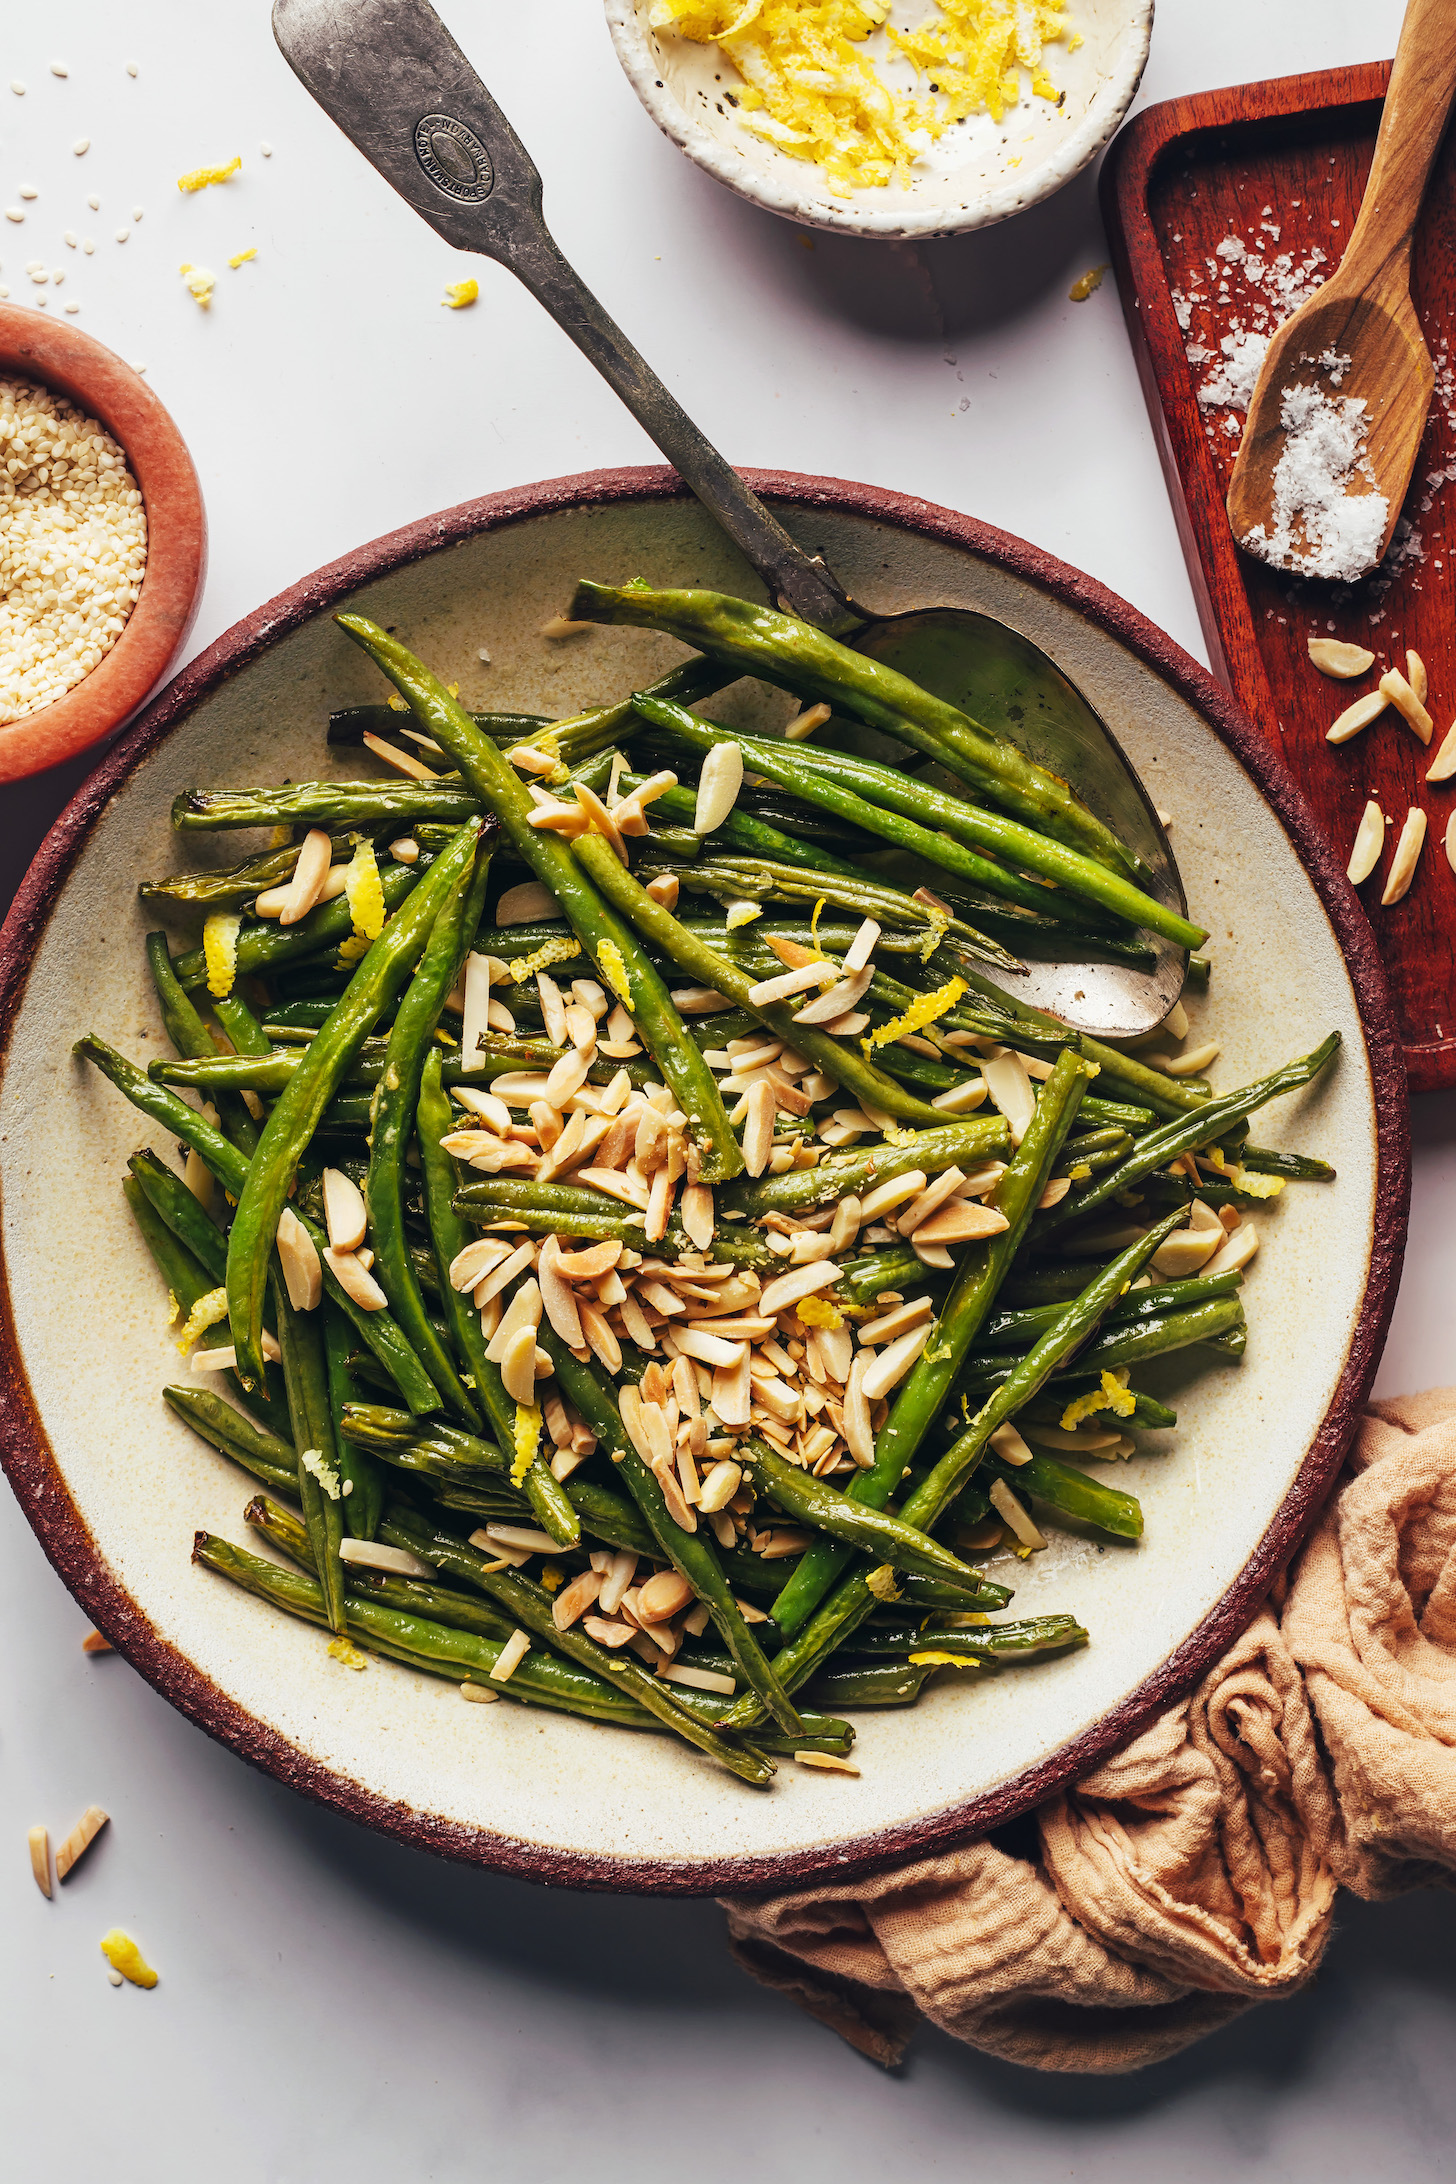 A bowl of roasted green beans with lemon zest, sesame seeds, salt, and chopped almonds.